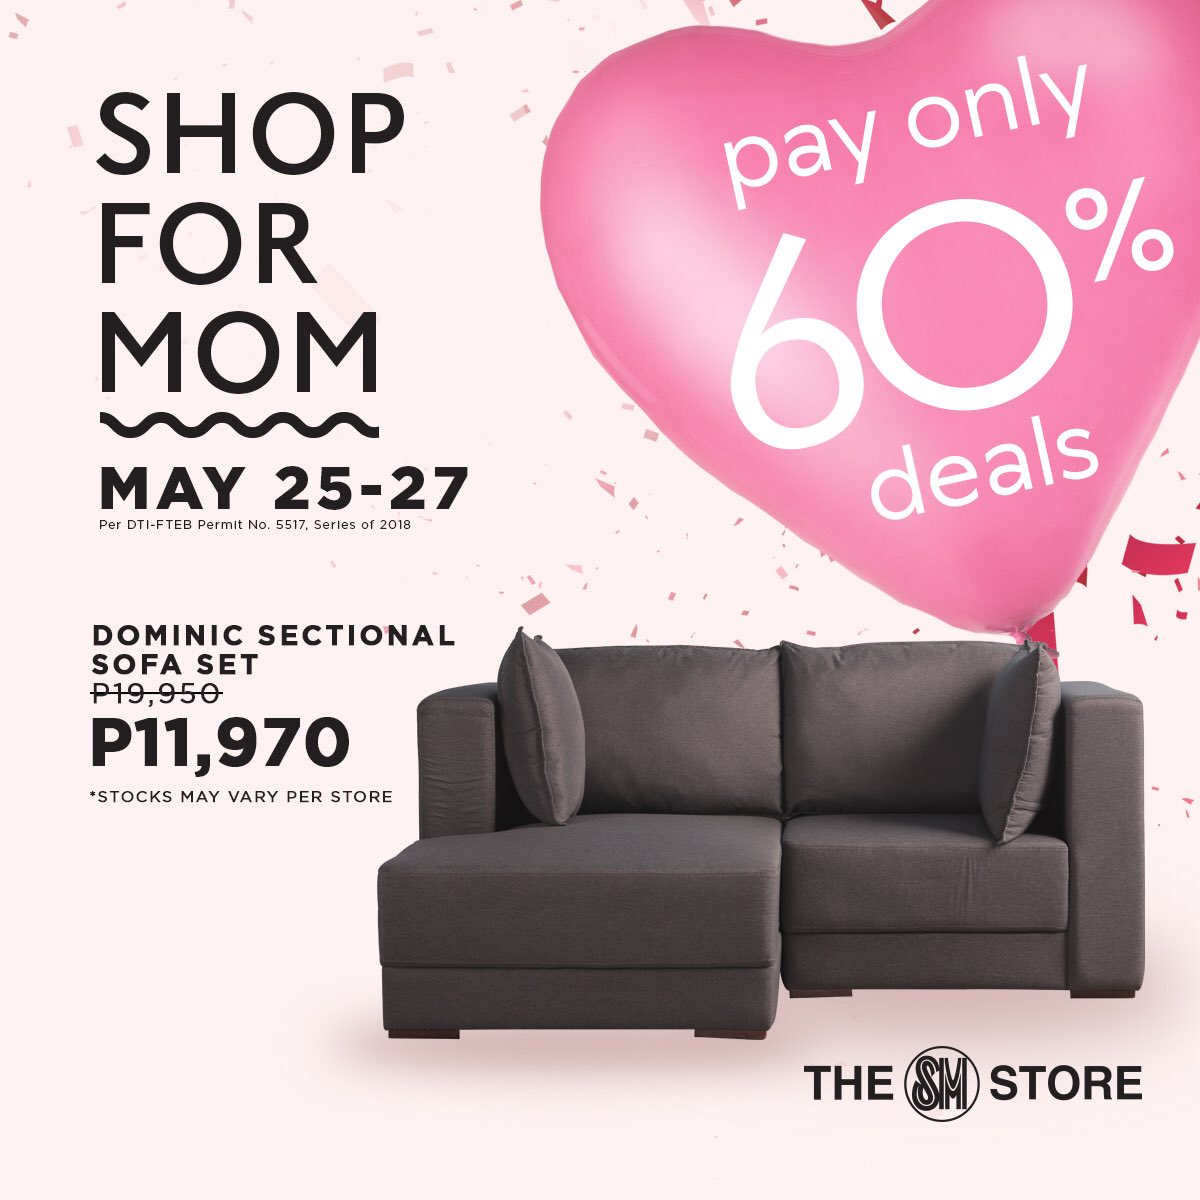 Sm Home On Twitter It S Not Too Late To Give Your Mom The Gift